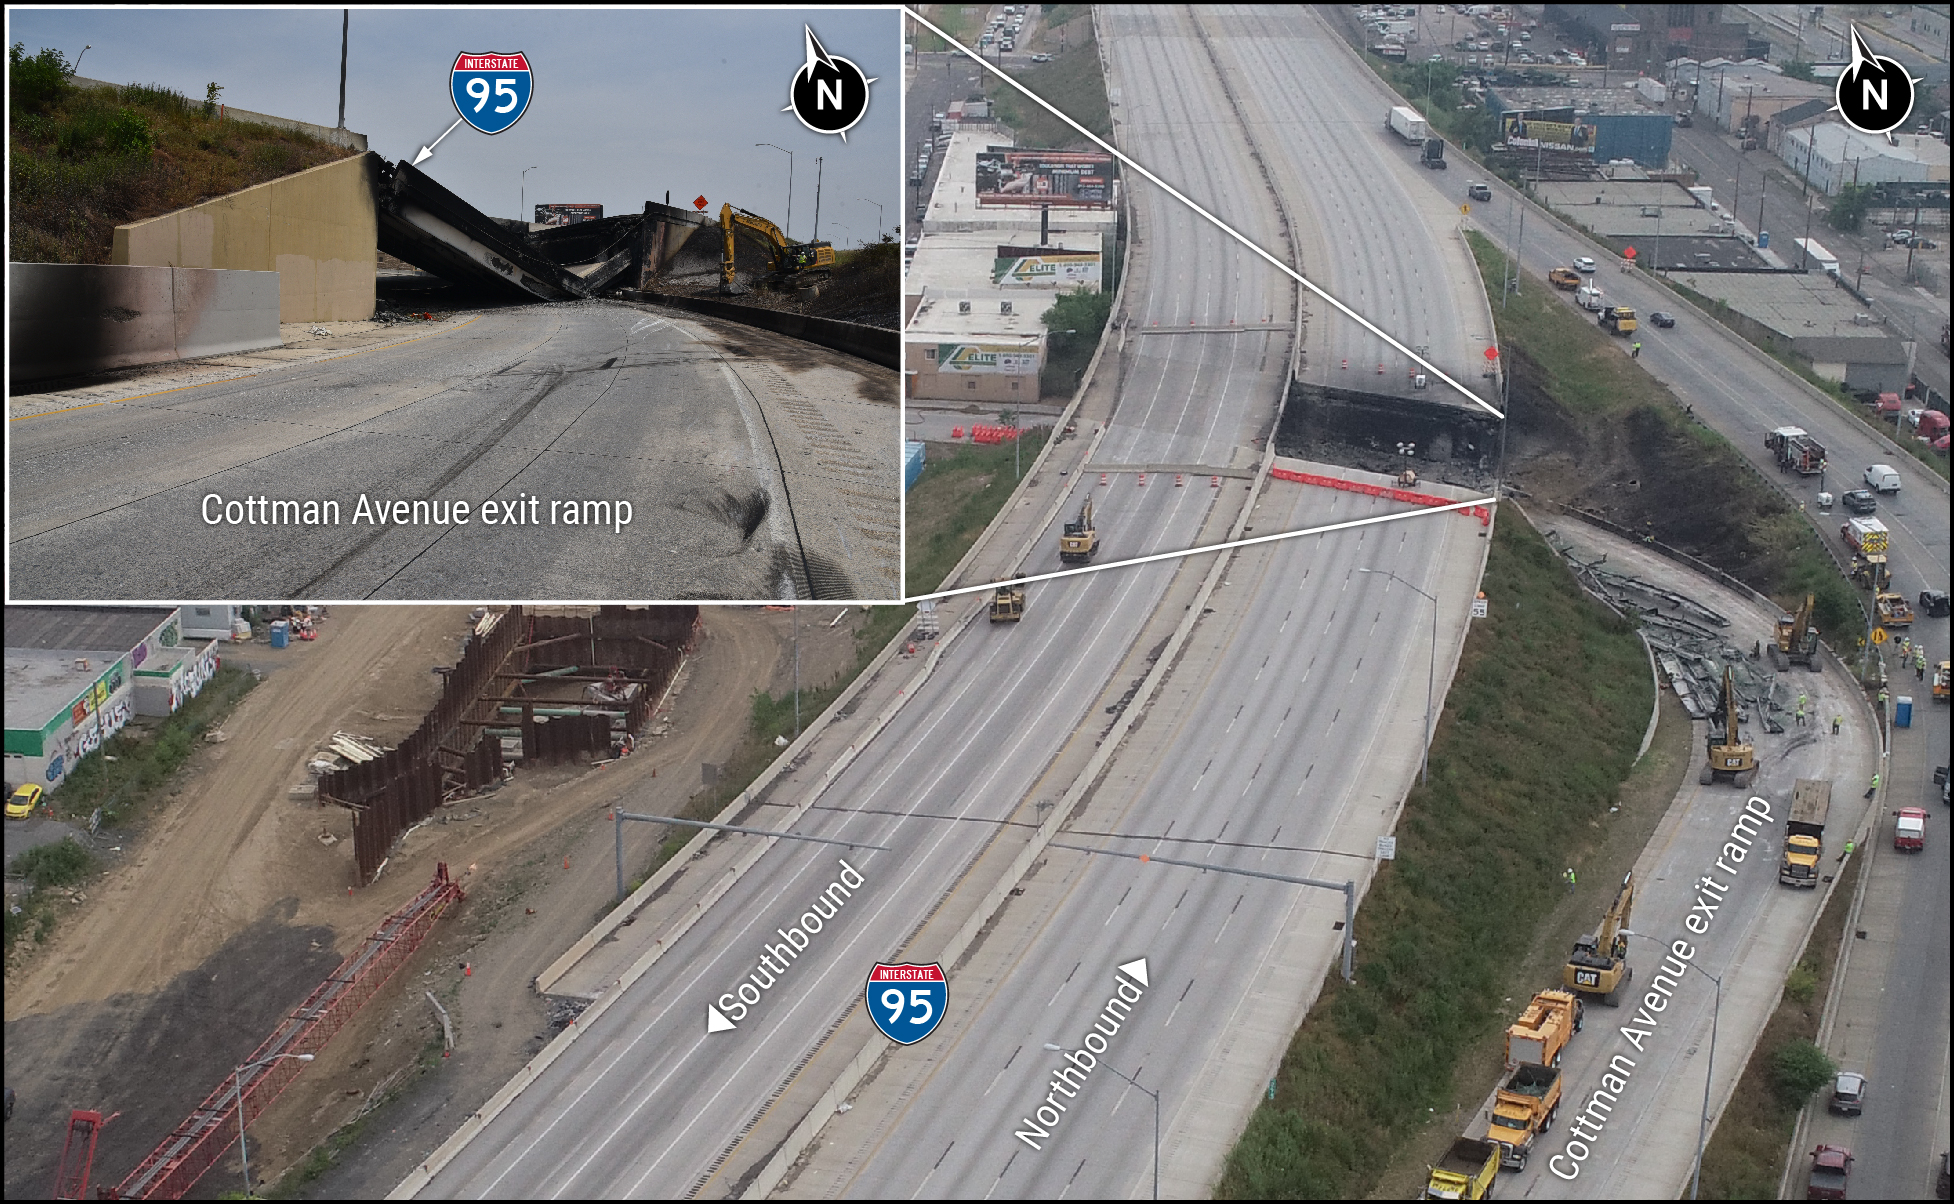 Northbound view of I-95 crash location with collapsed section.